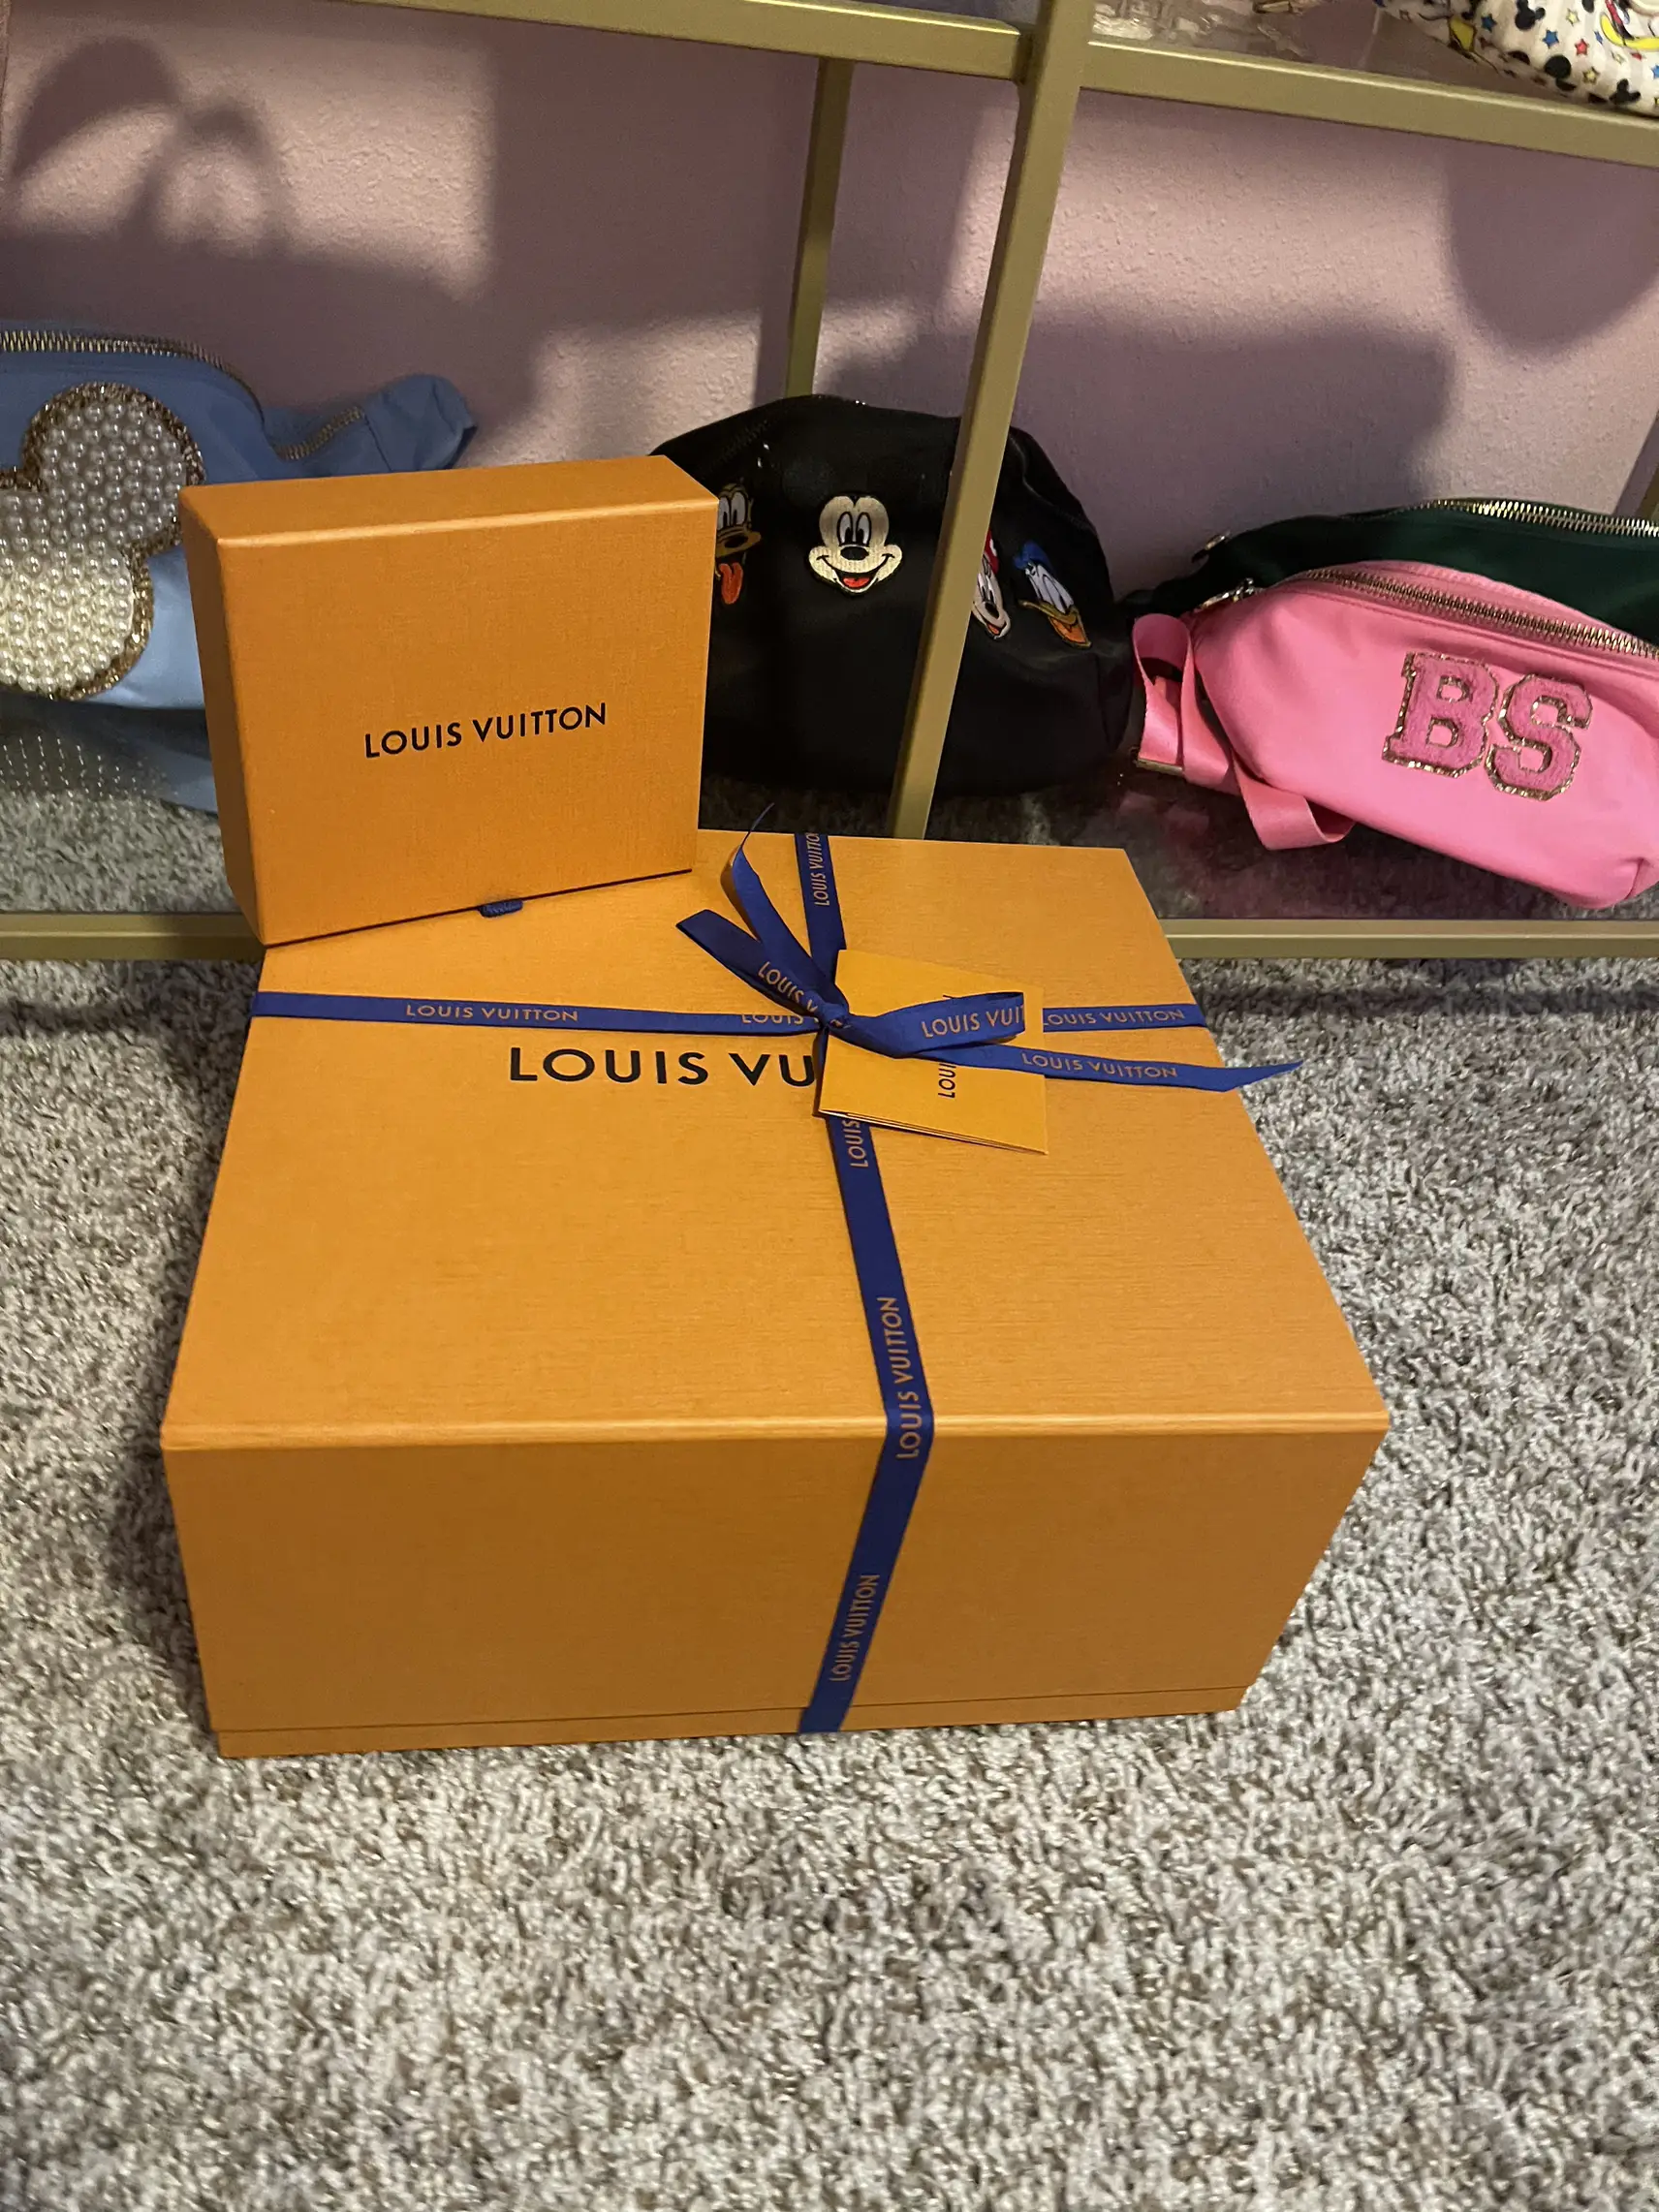 LUXURY UNBOXING  LOUIS VUITTON ON THE GO MM 